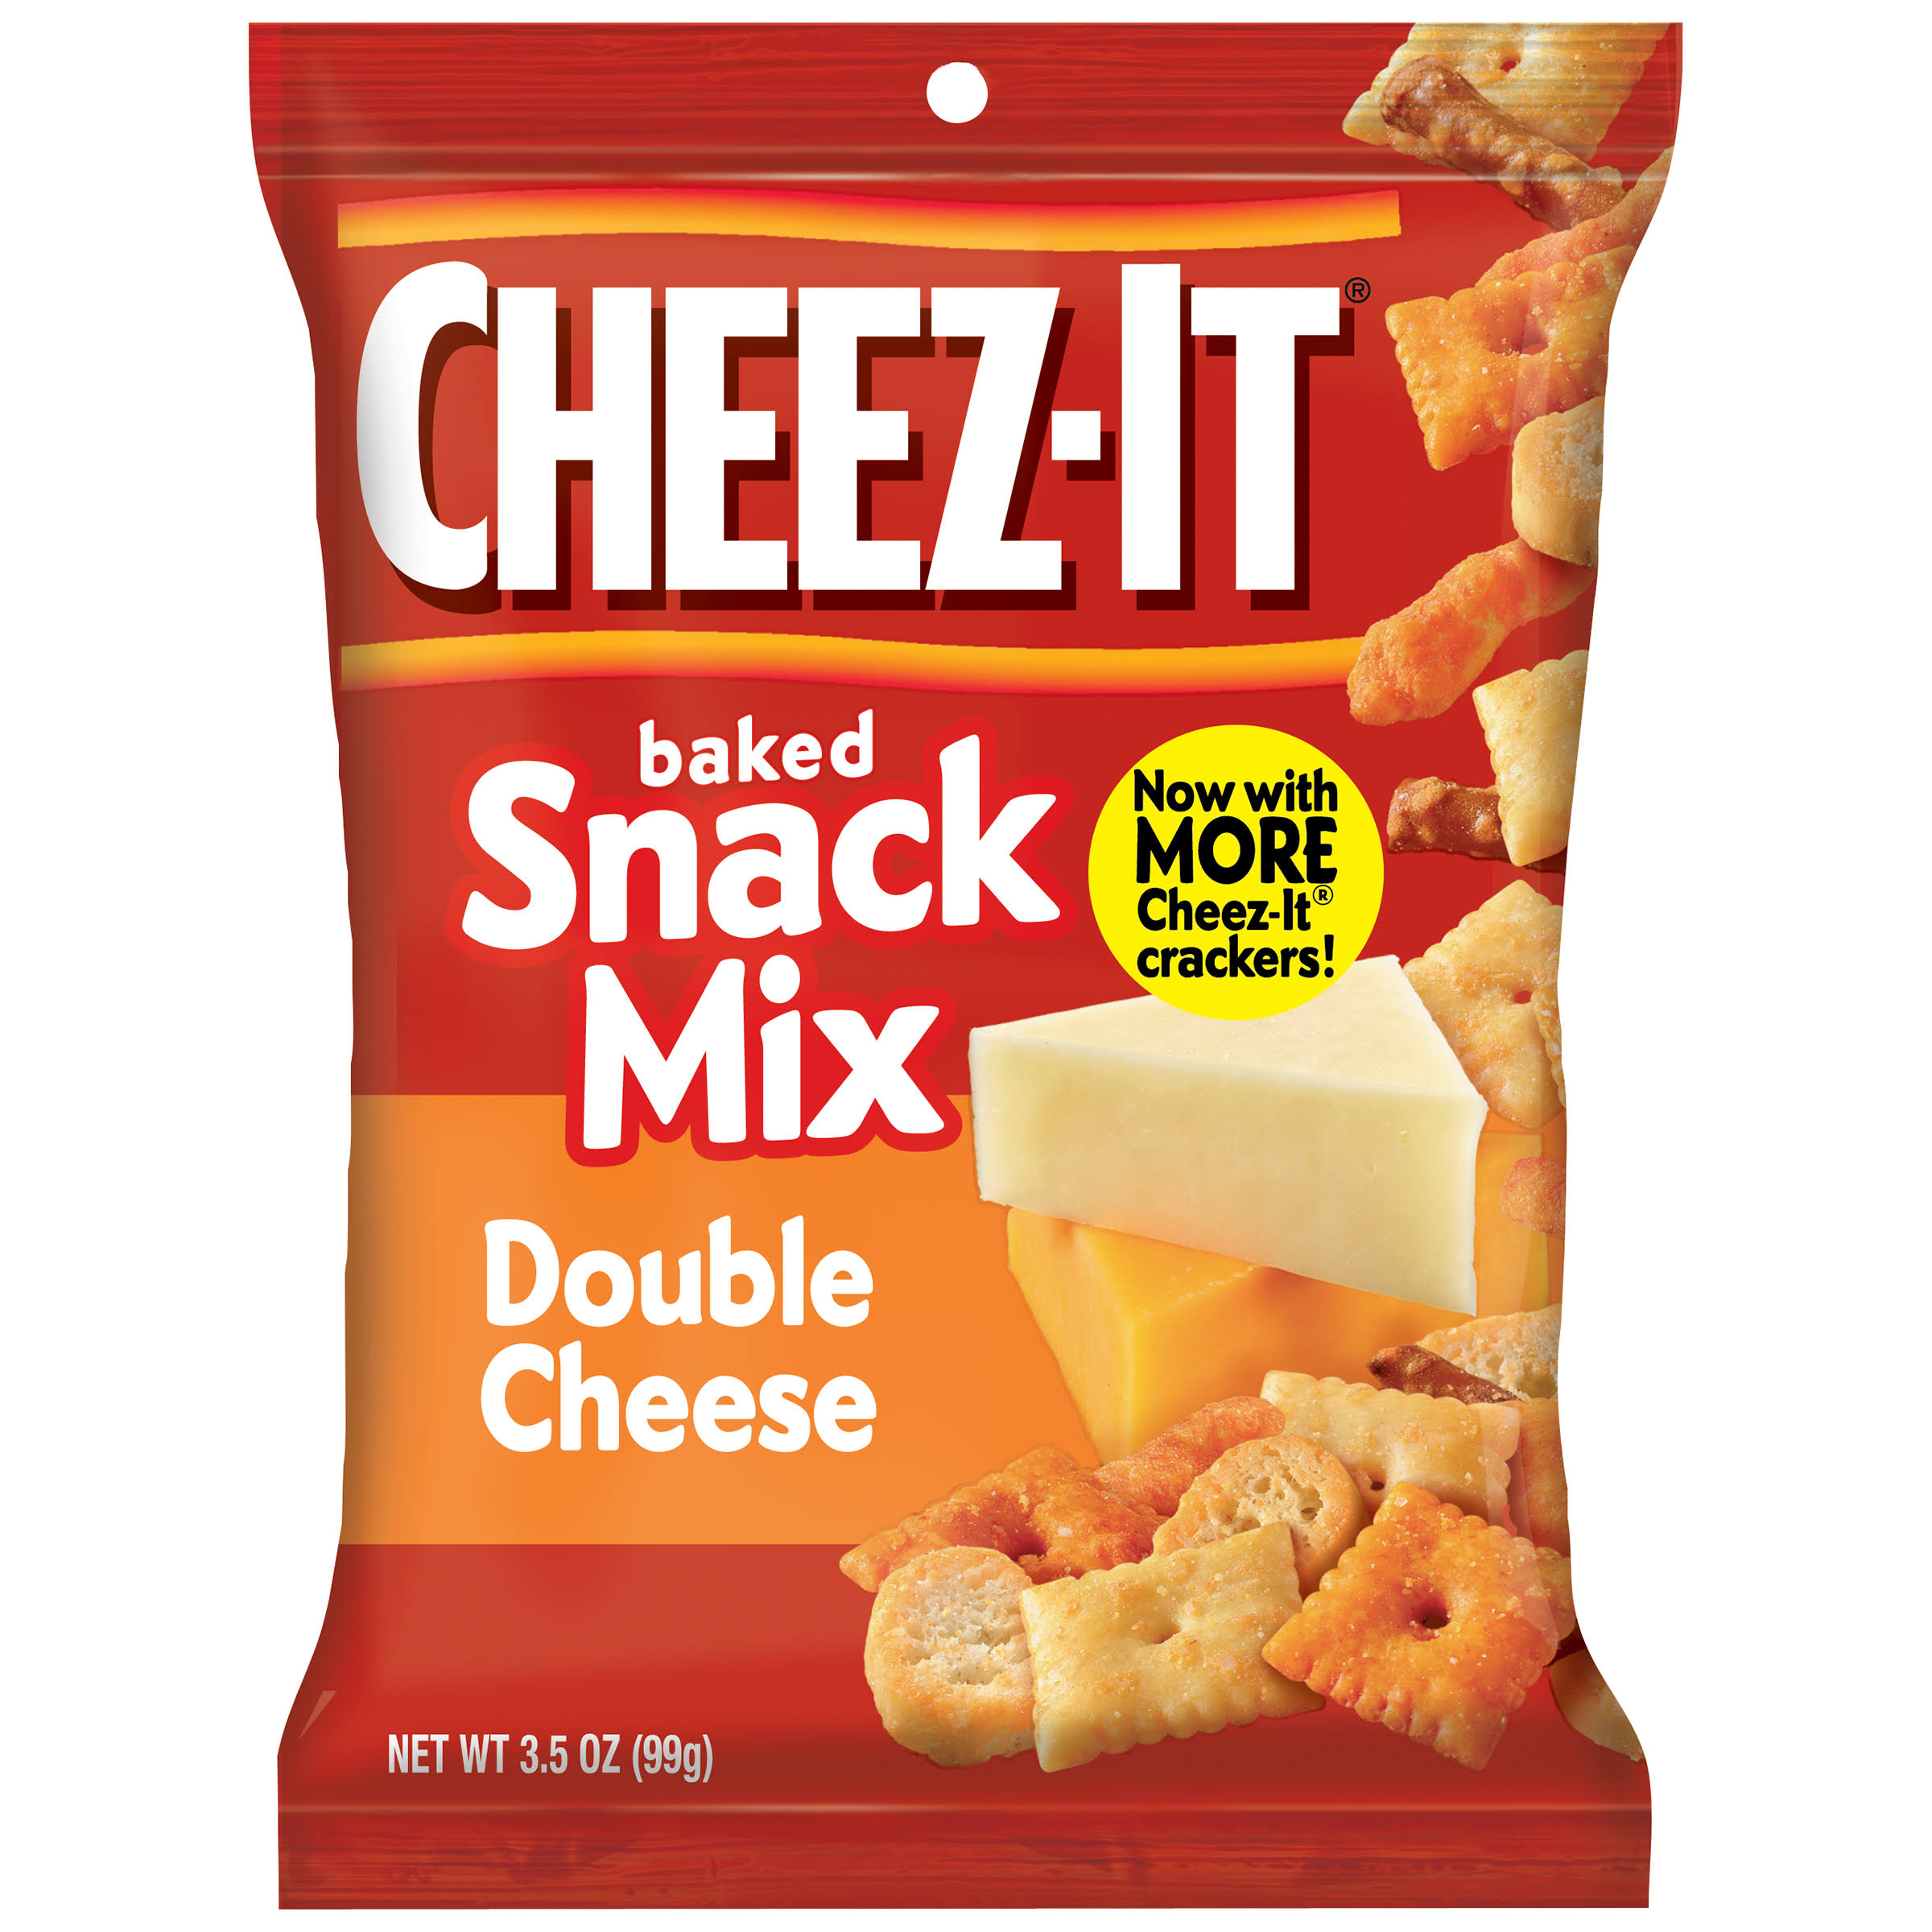 Cheez-It Baked Snack Mix - Double Cheese, 120g